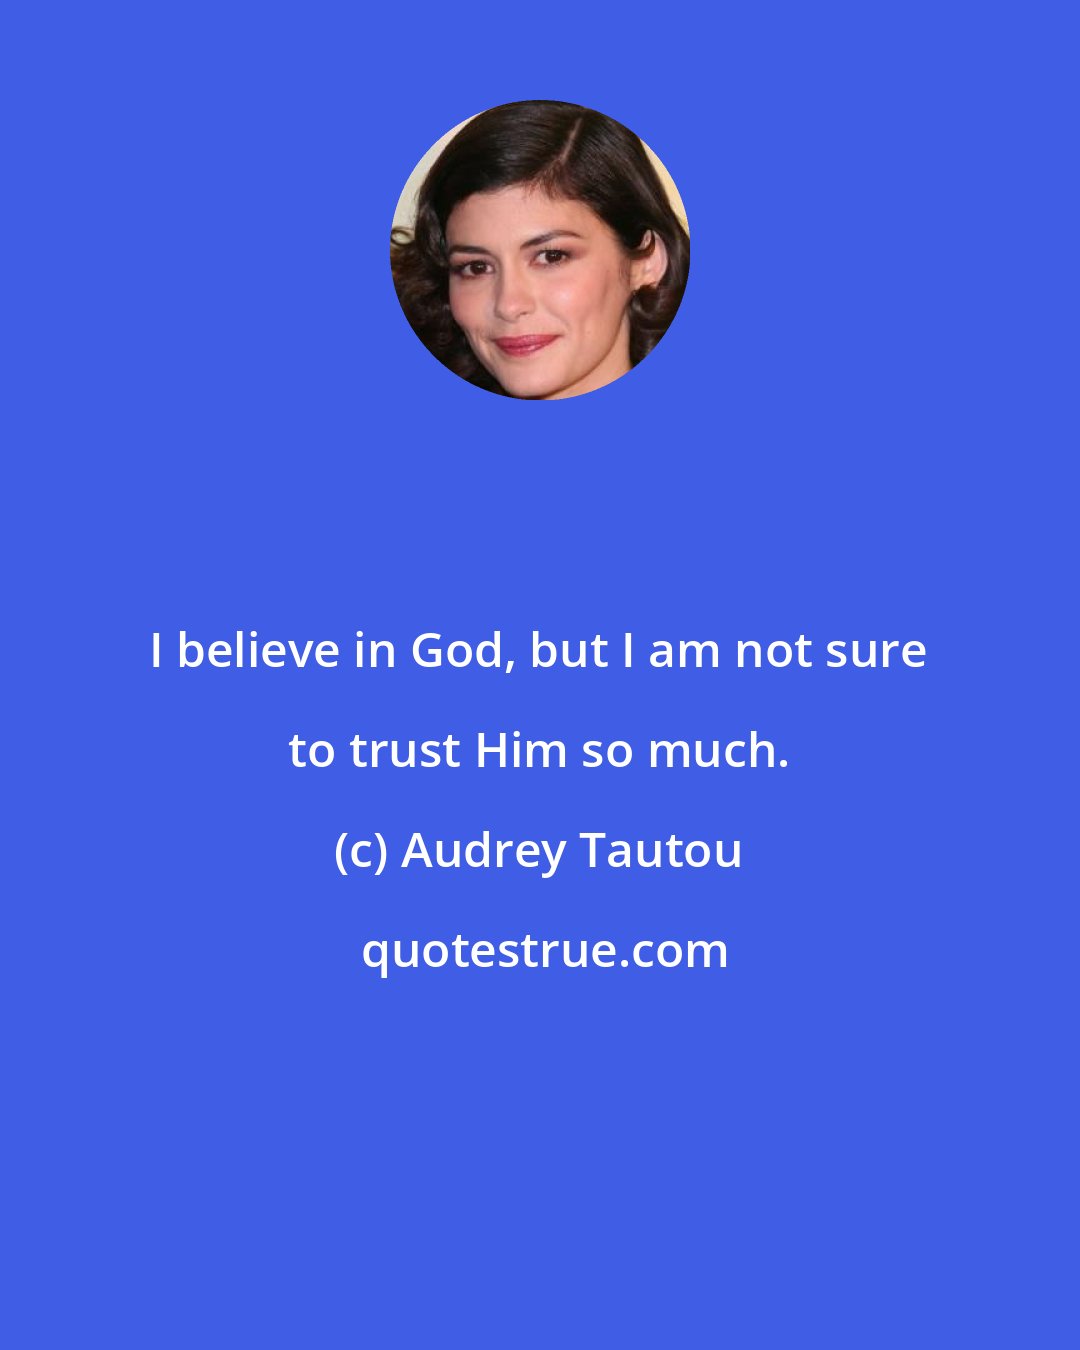 Audrey Tautou: I believe in God, but I am not sure to trust Him so much.